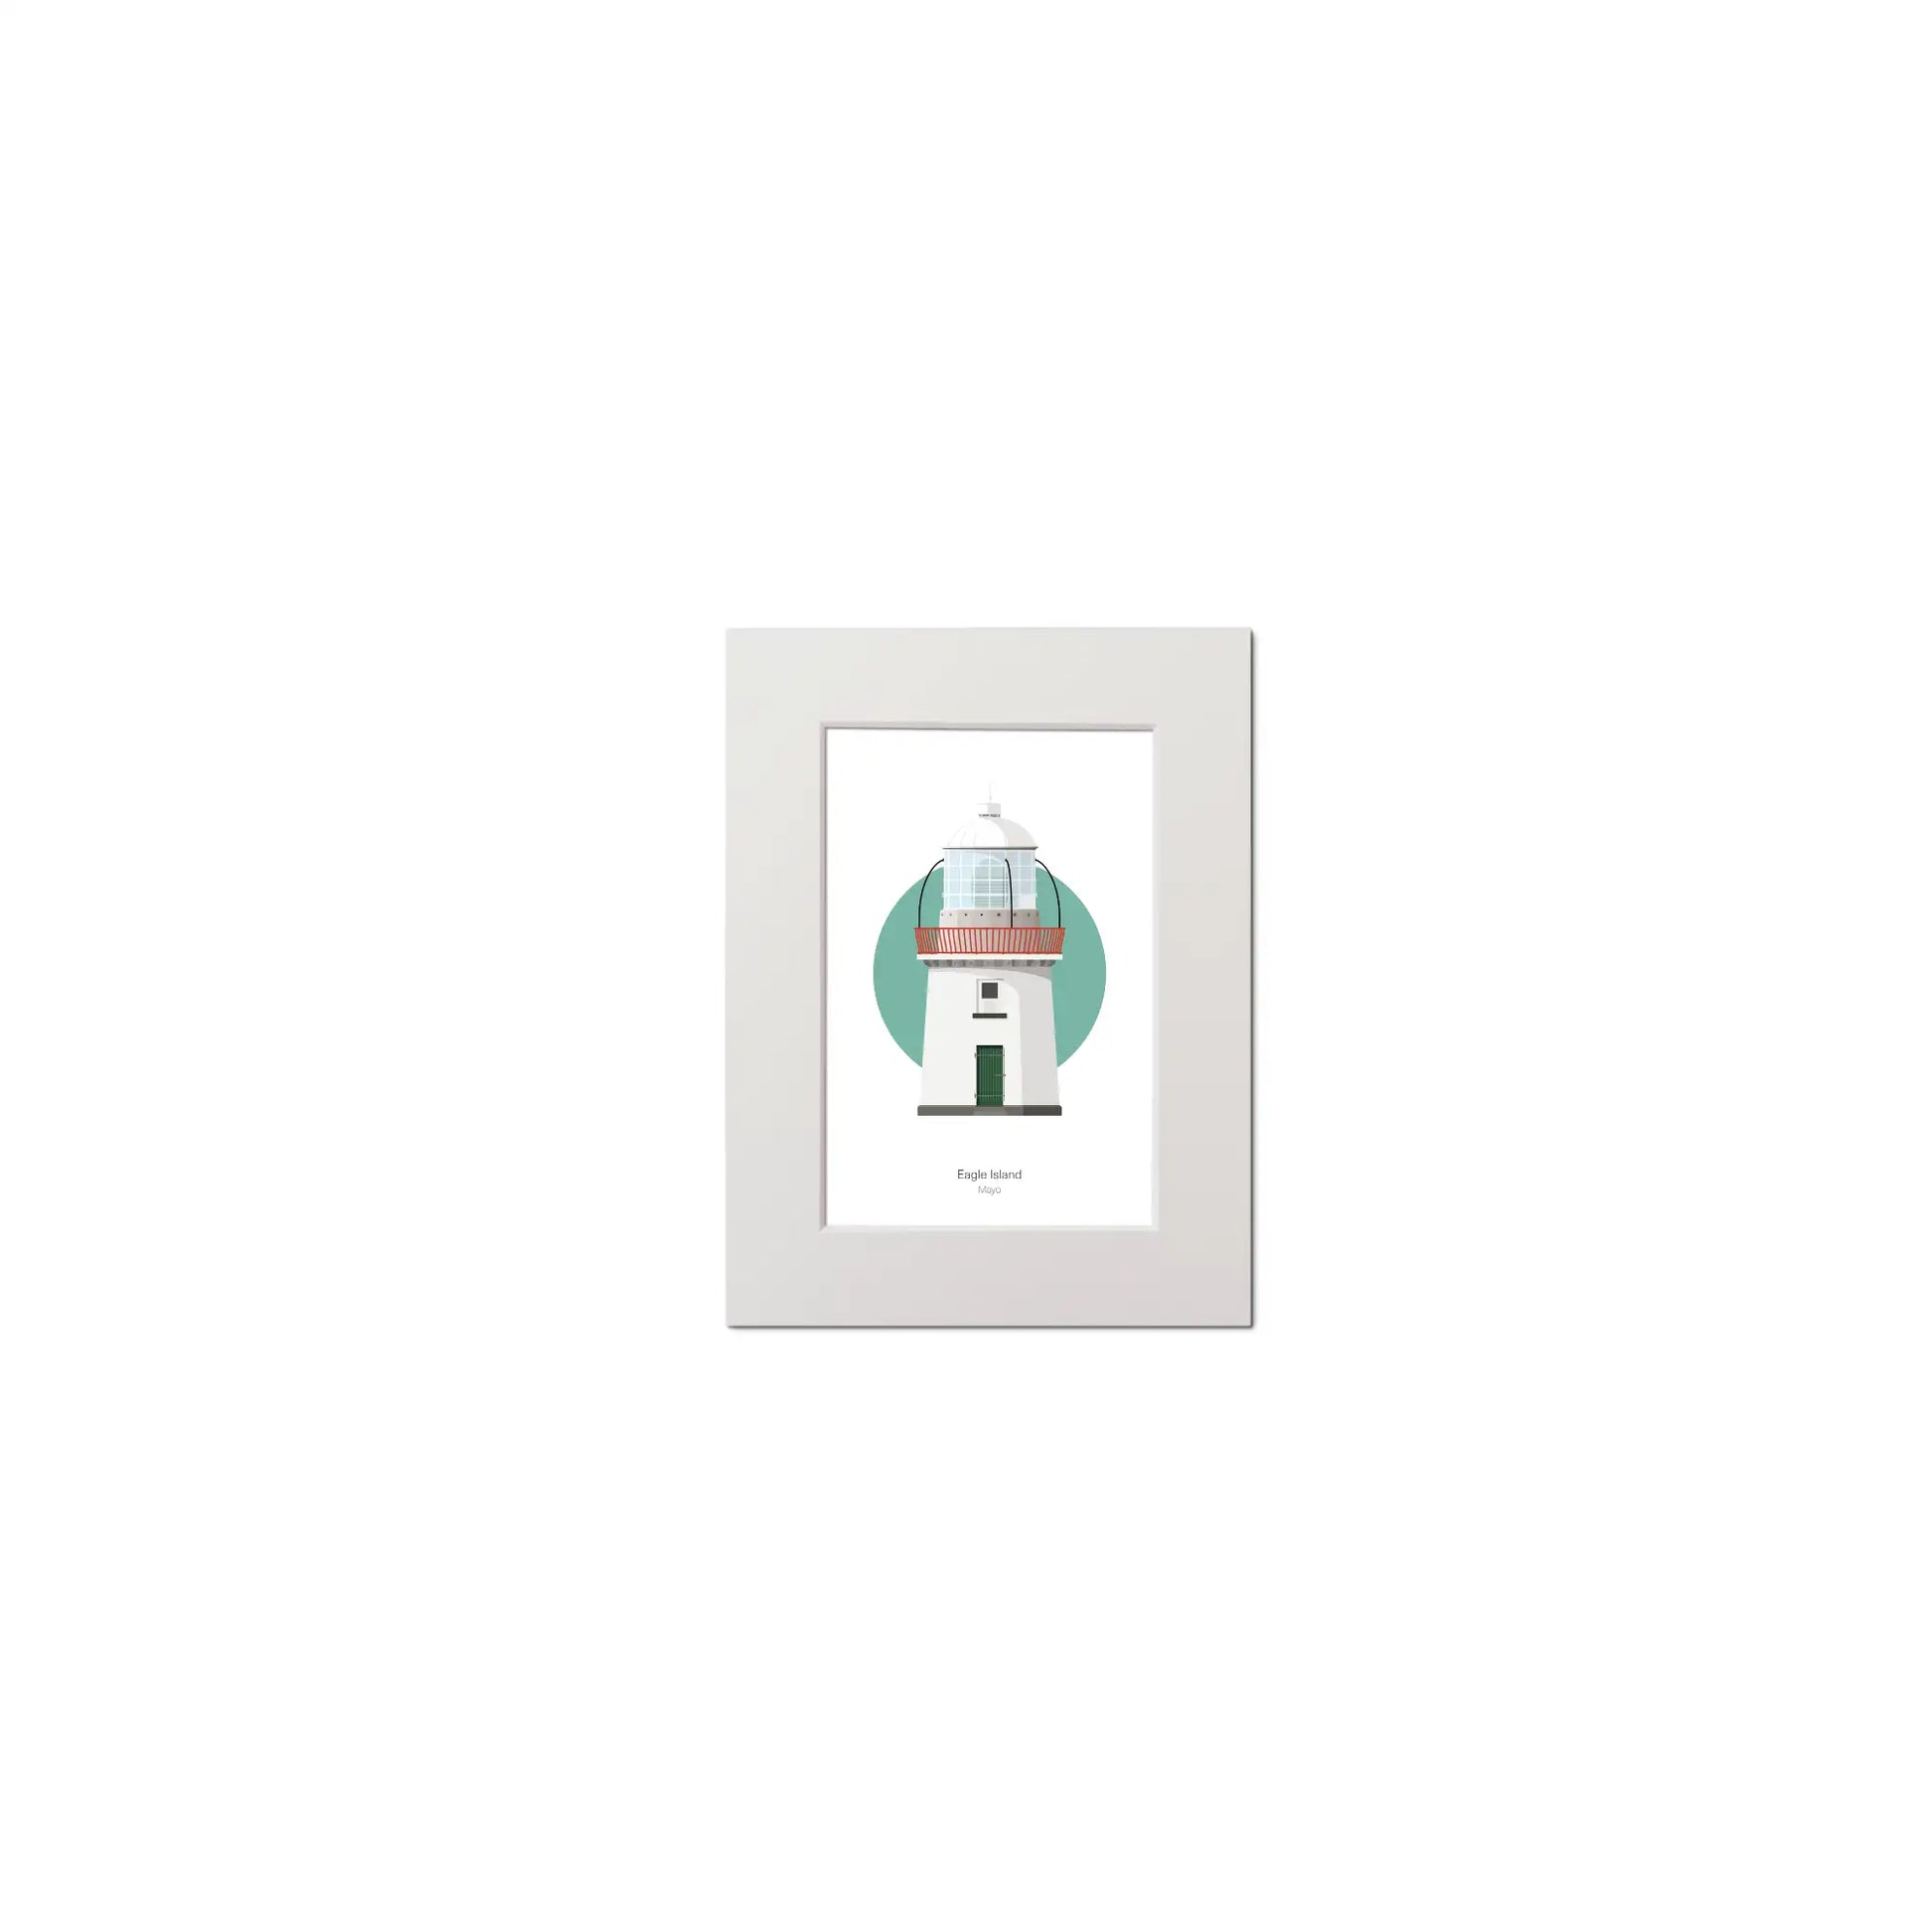 Contemporary graphic illustration of Eagle Island lighthouse on a white background inside light blue square, mounted and measuring 15x20cm.